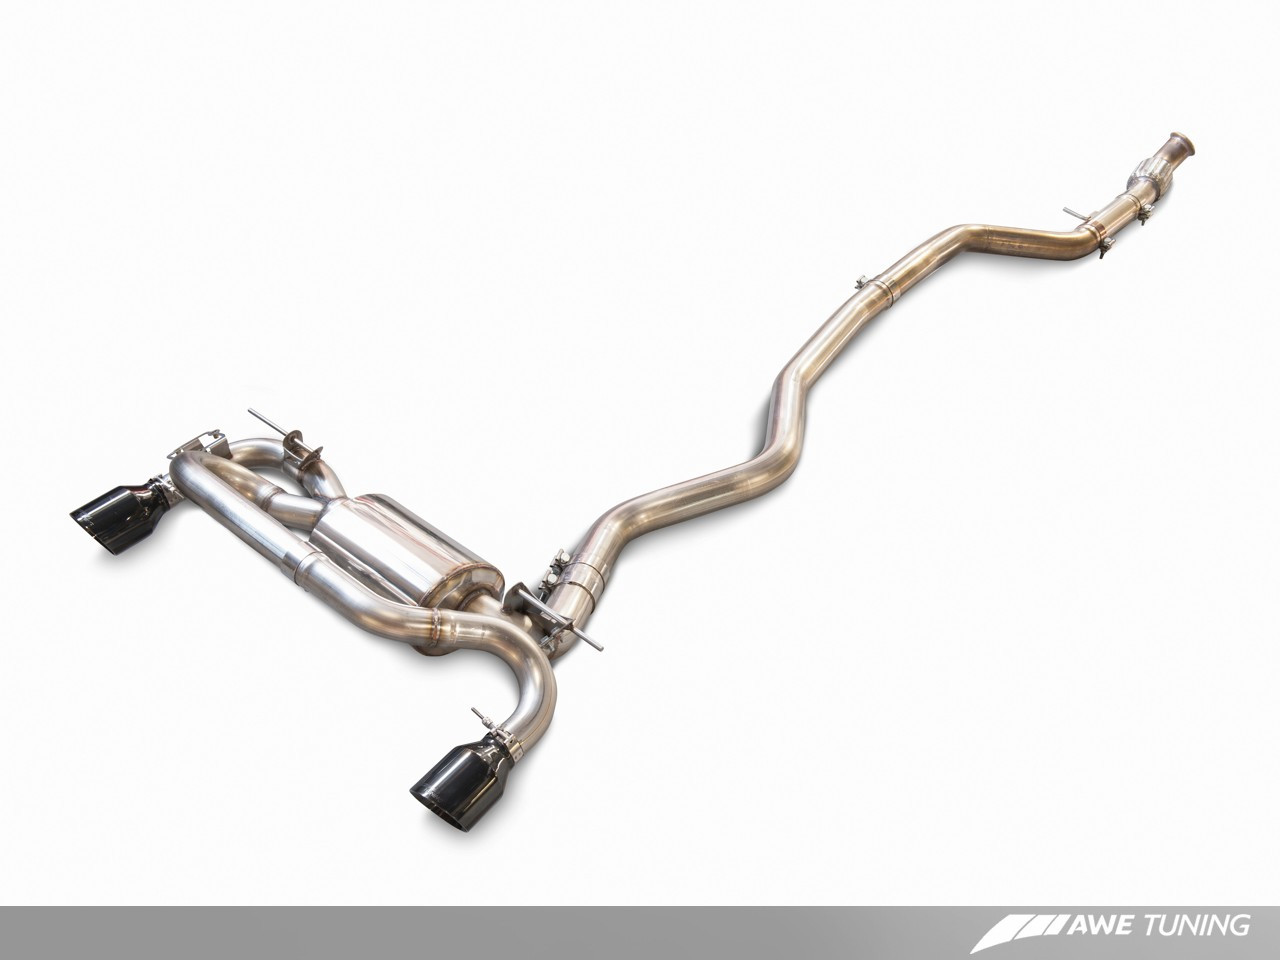 AWE Tuning BMW F3x 435i Touring Edition Exhaust - Shown with Optional Extra Performance Mid-Pipe